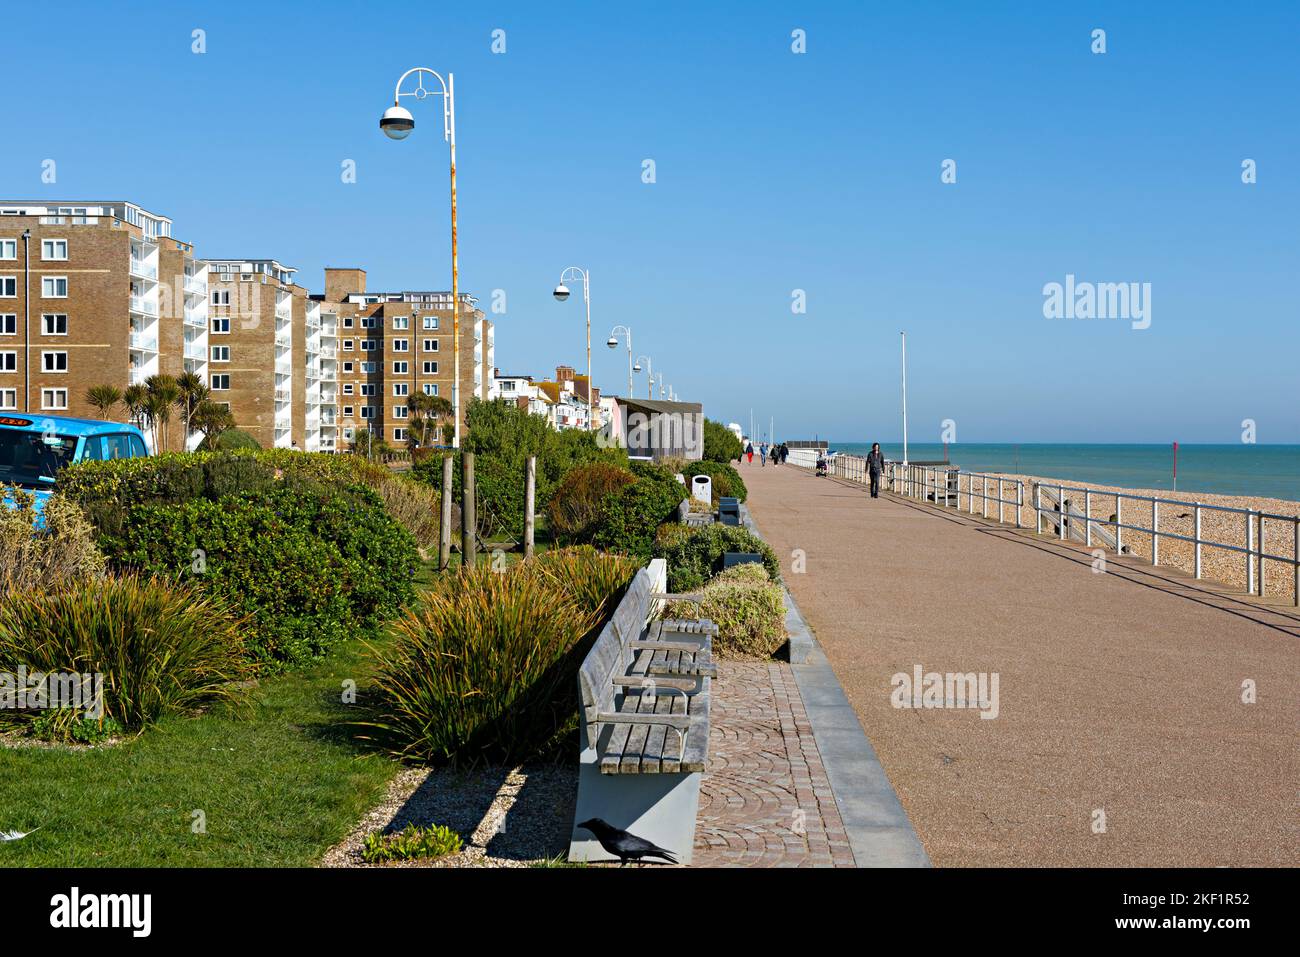 Promenade by the sea at Eastbourne, East Sussex, UK Stock Photo